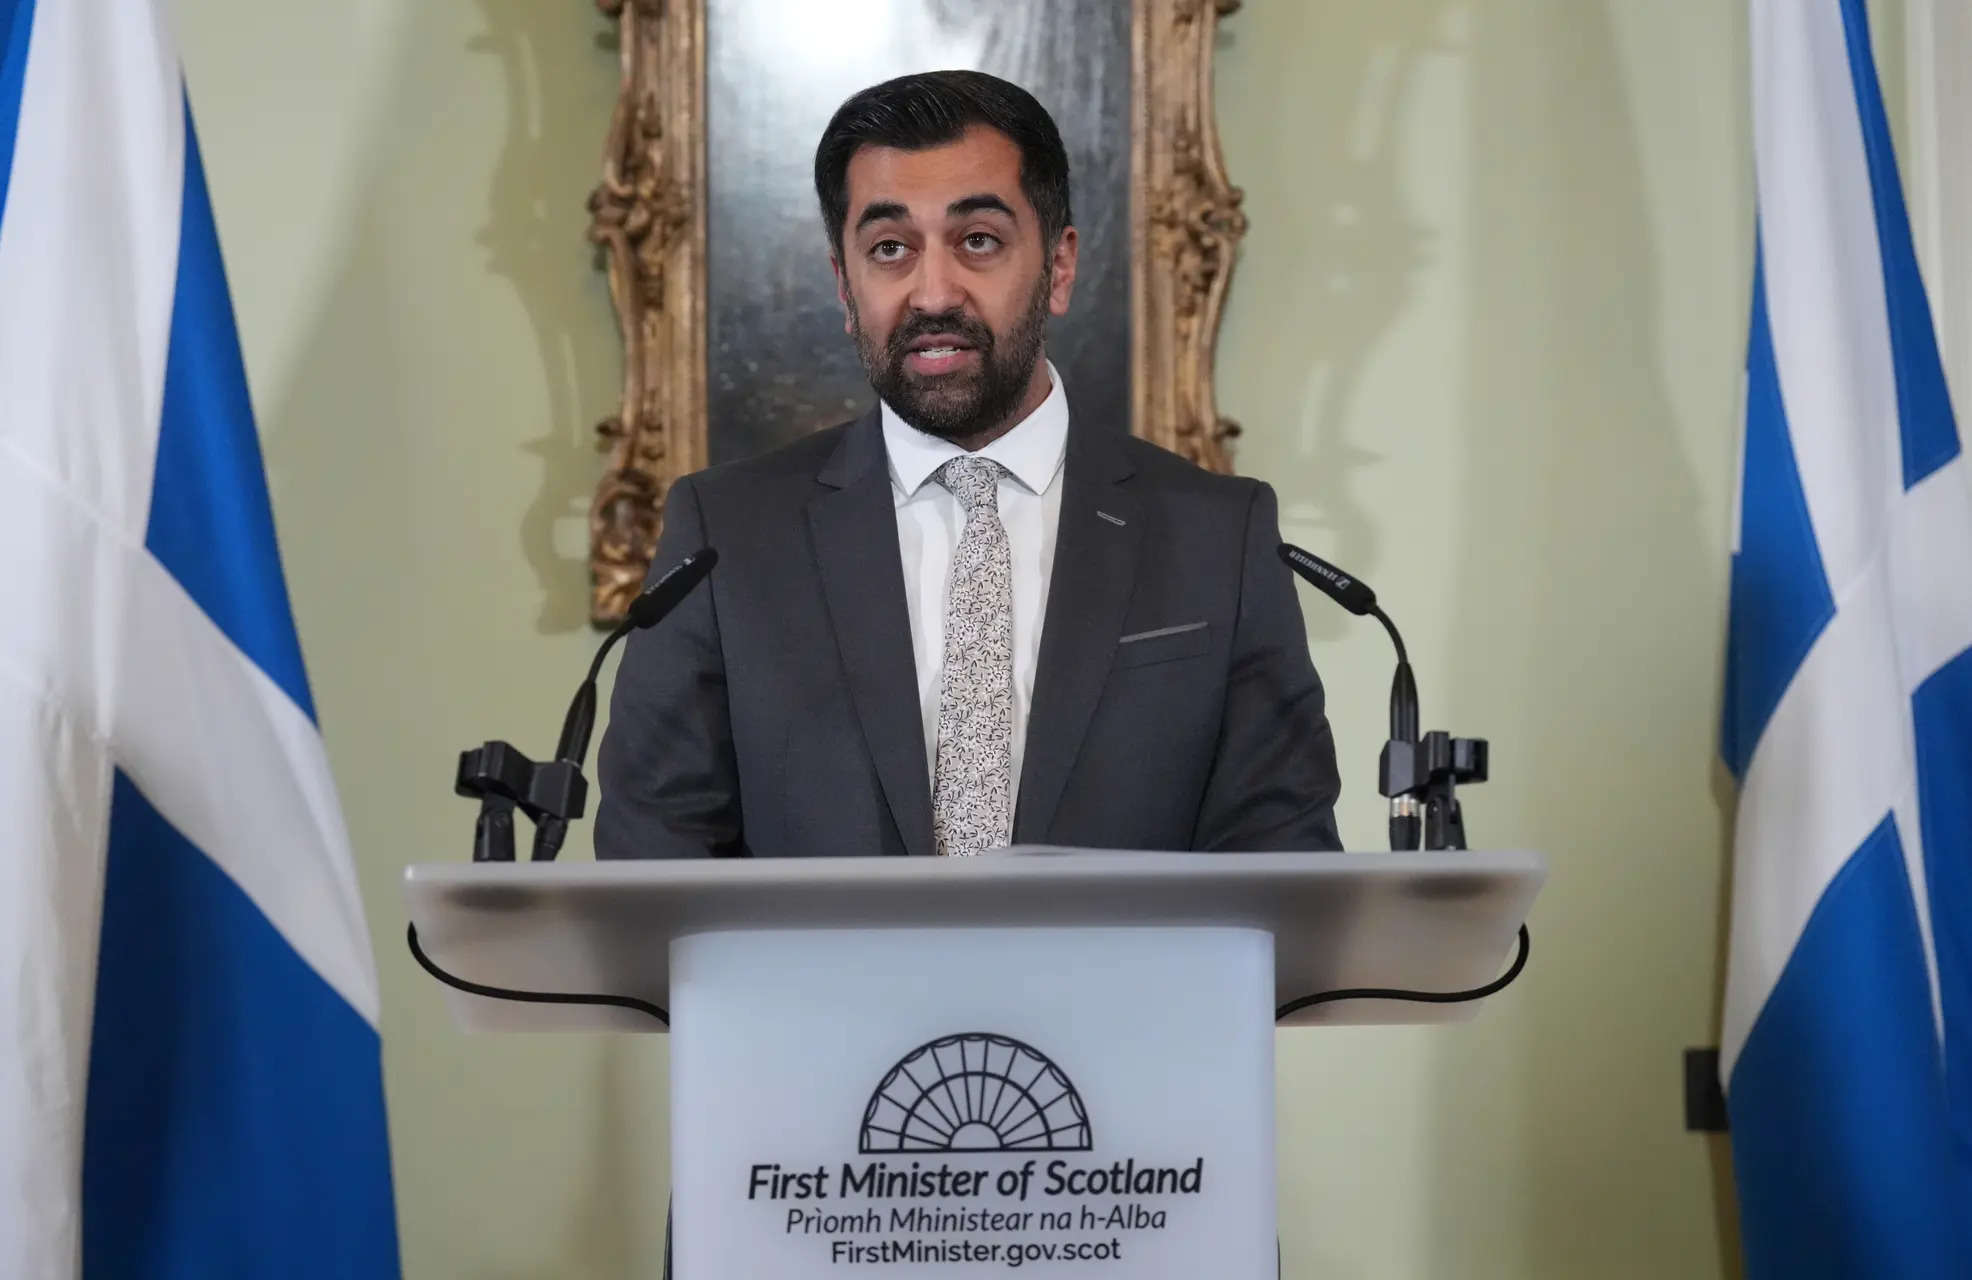 Scottish first minister Humza Yousaf resigns as SNP leader amid political turmoil 